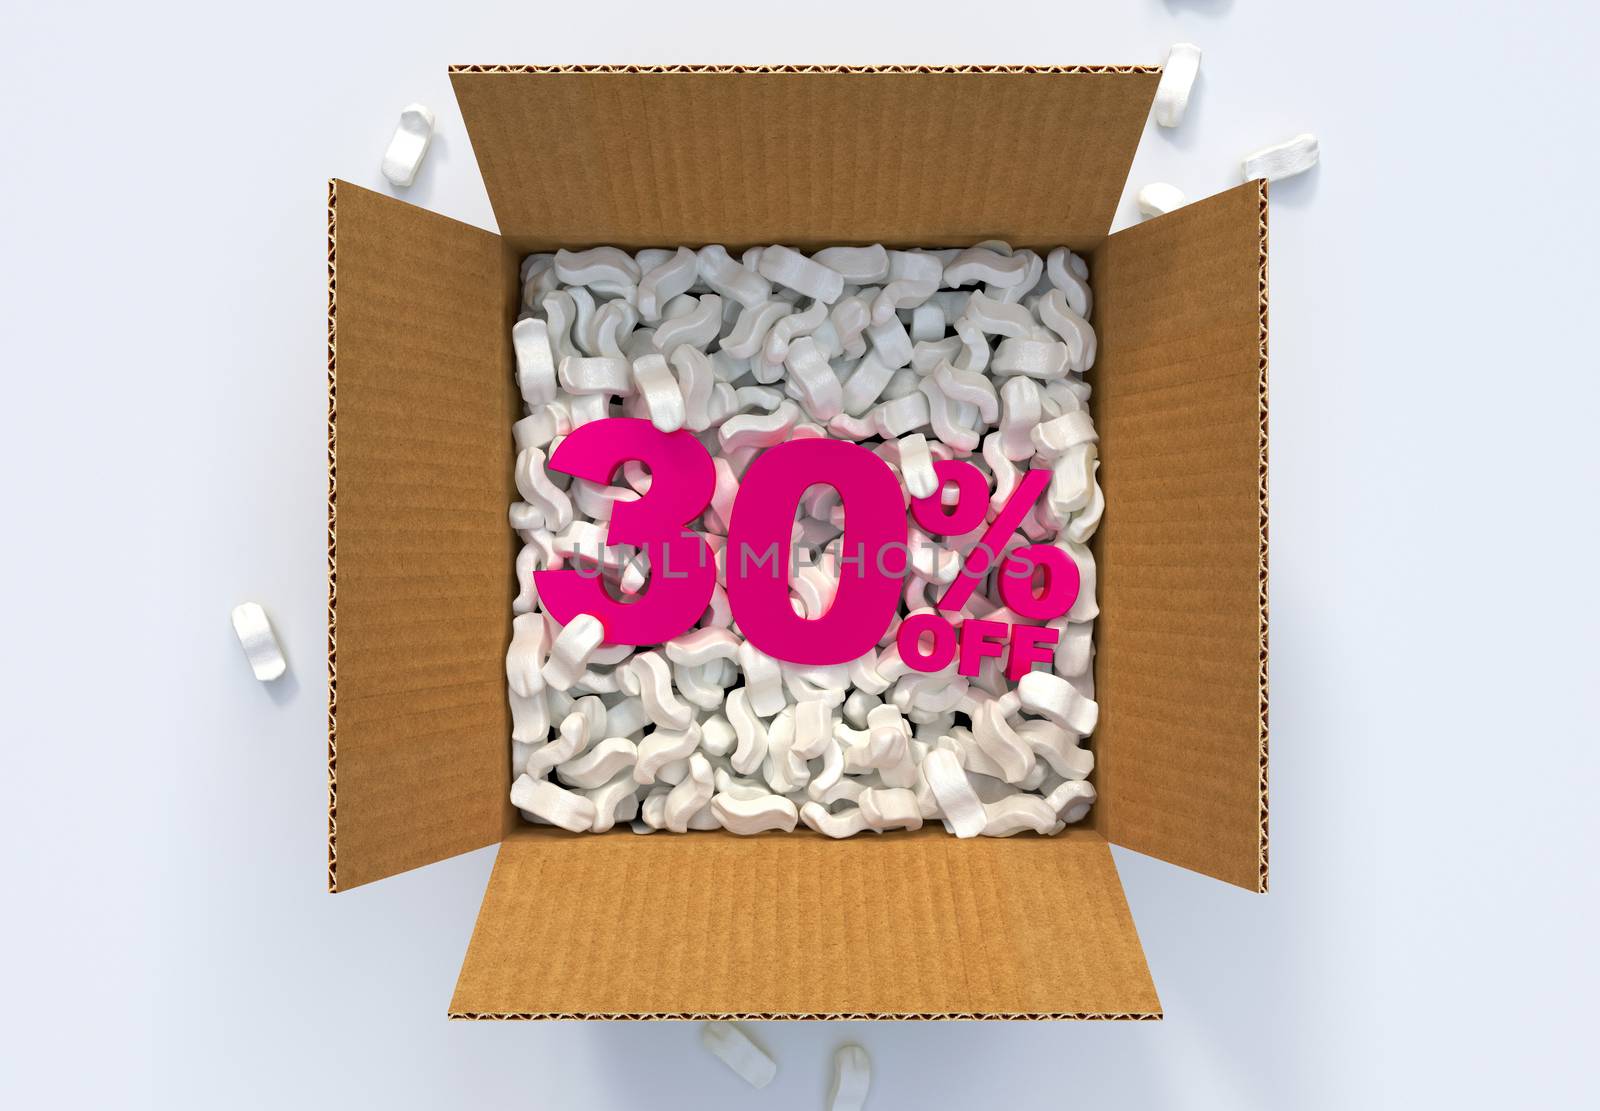 Cardboard Box with shipping peanuts and 30 percent off sign